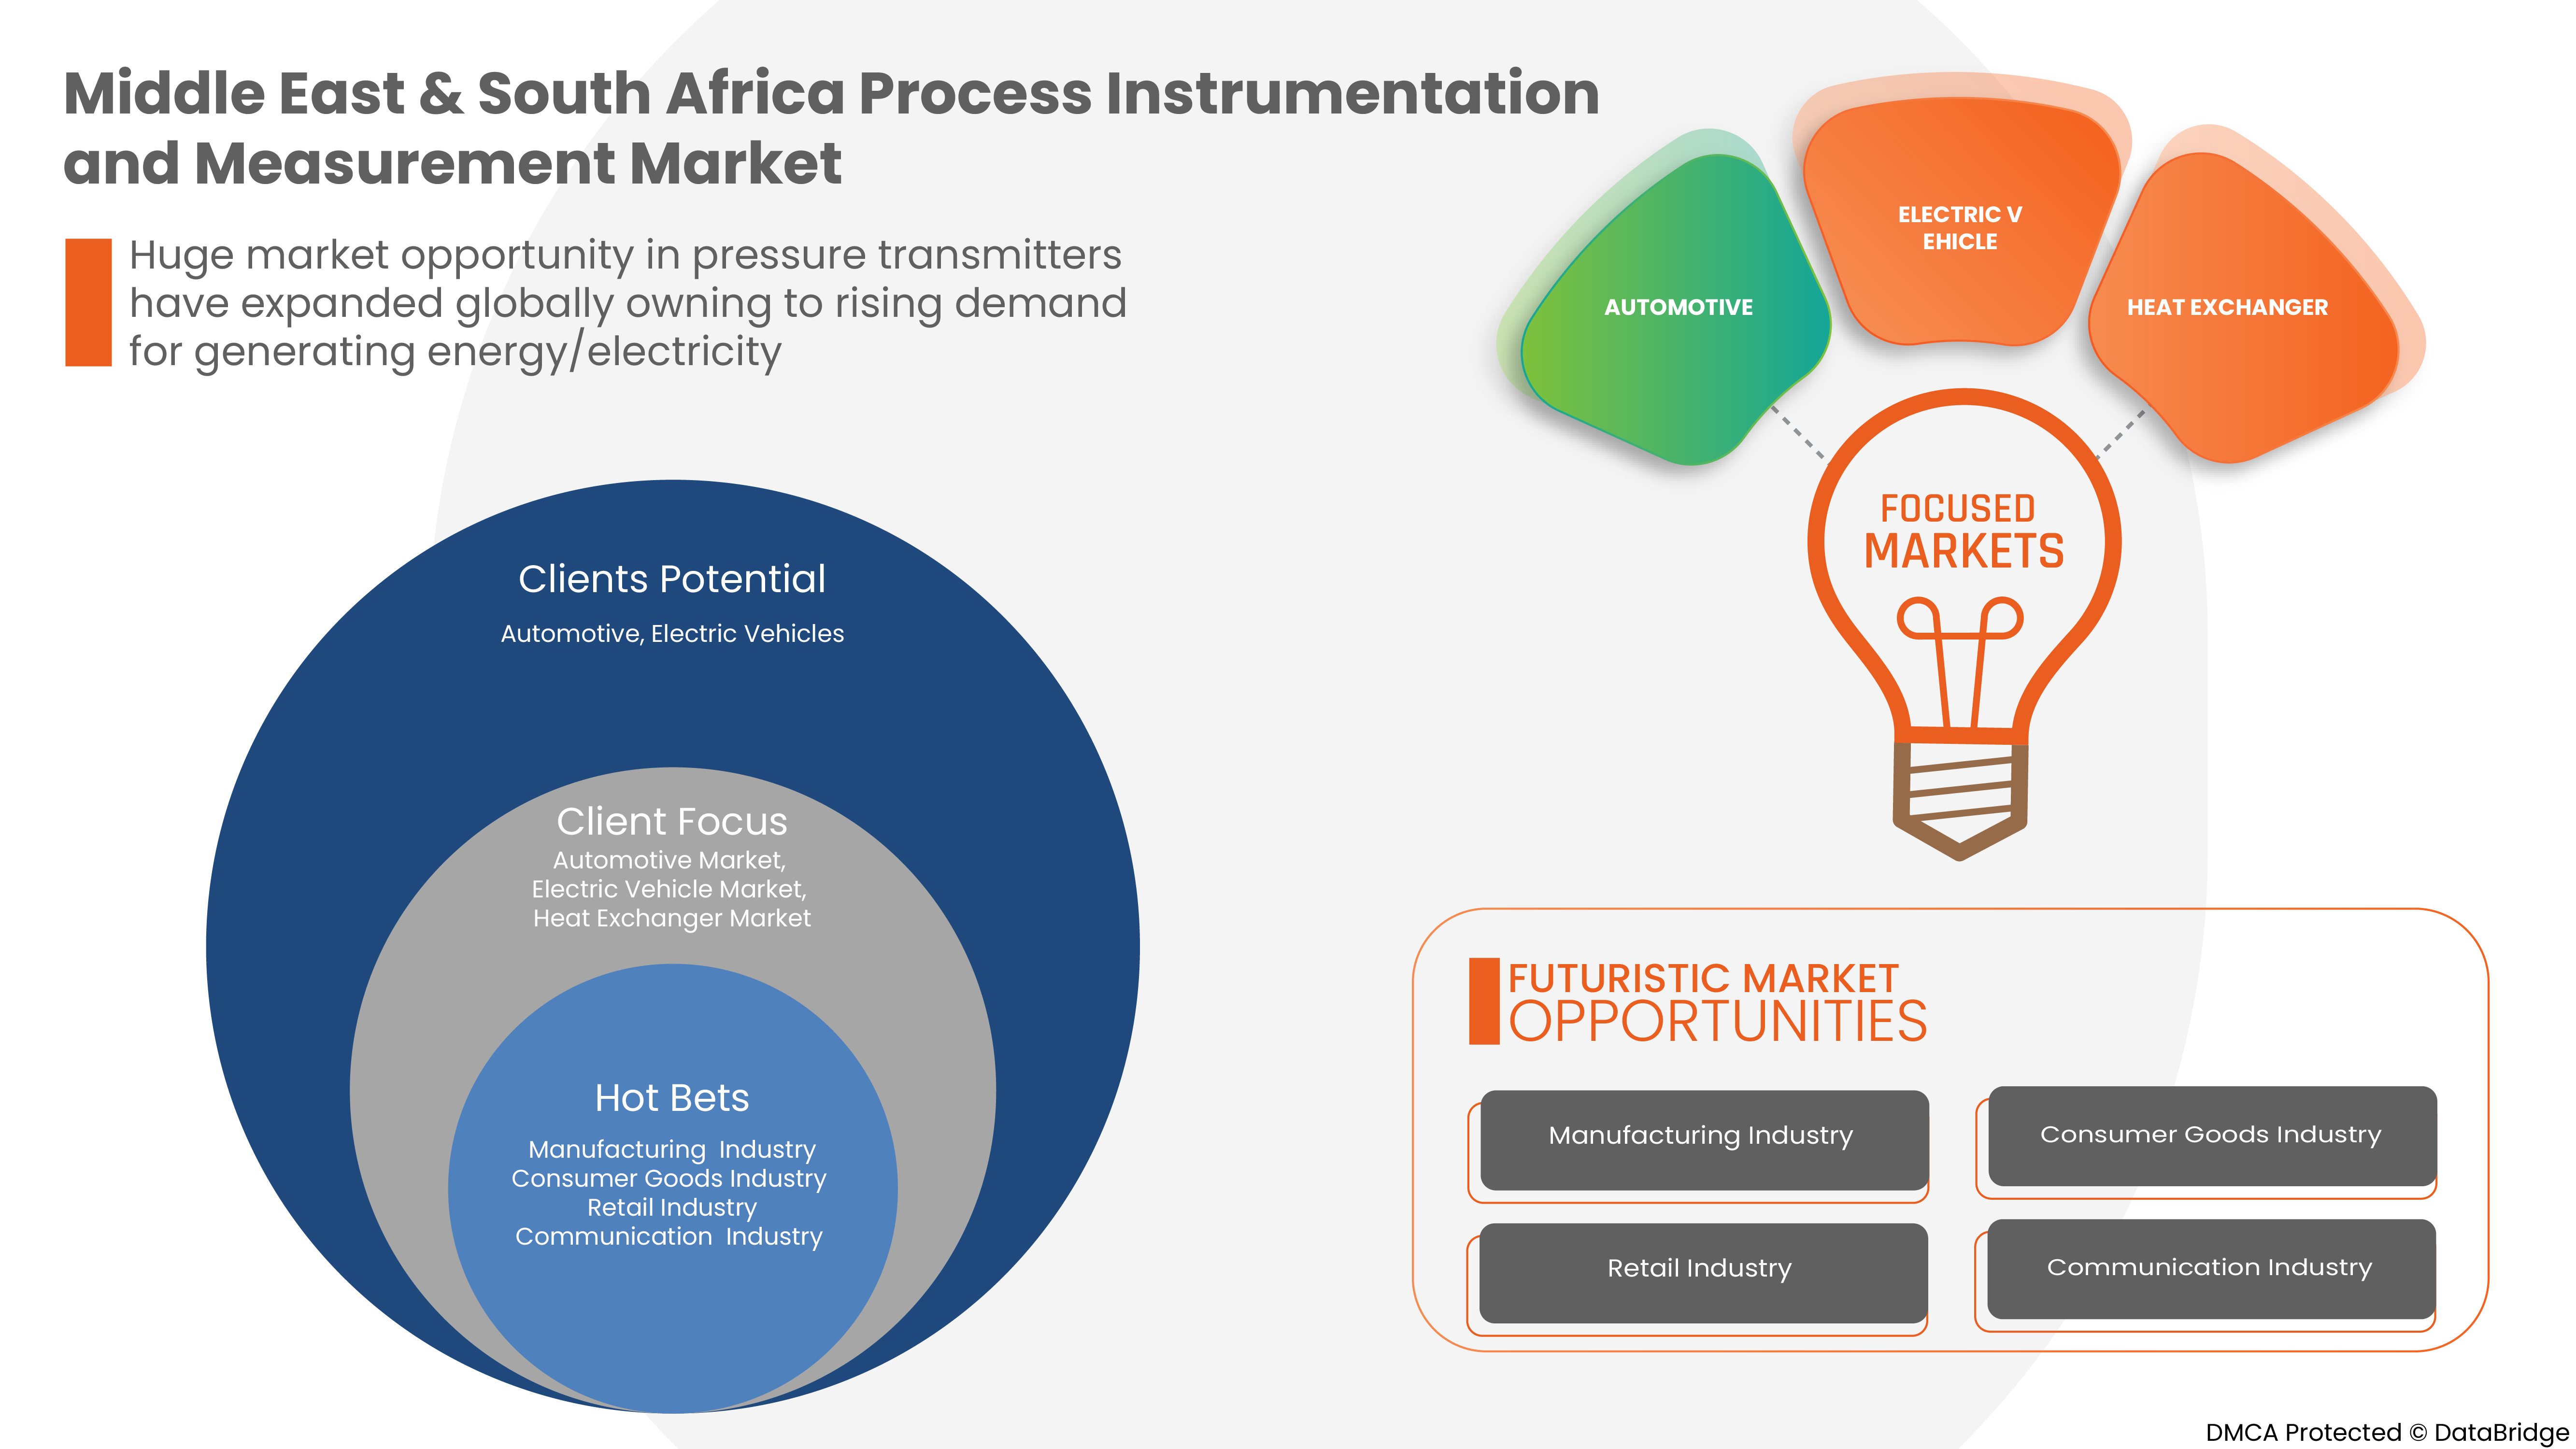 Middle East and South Africa Process Instrumentation and Measurement Market